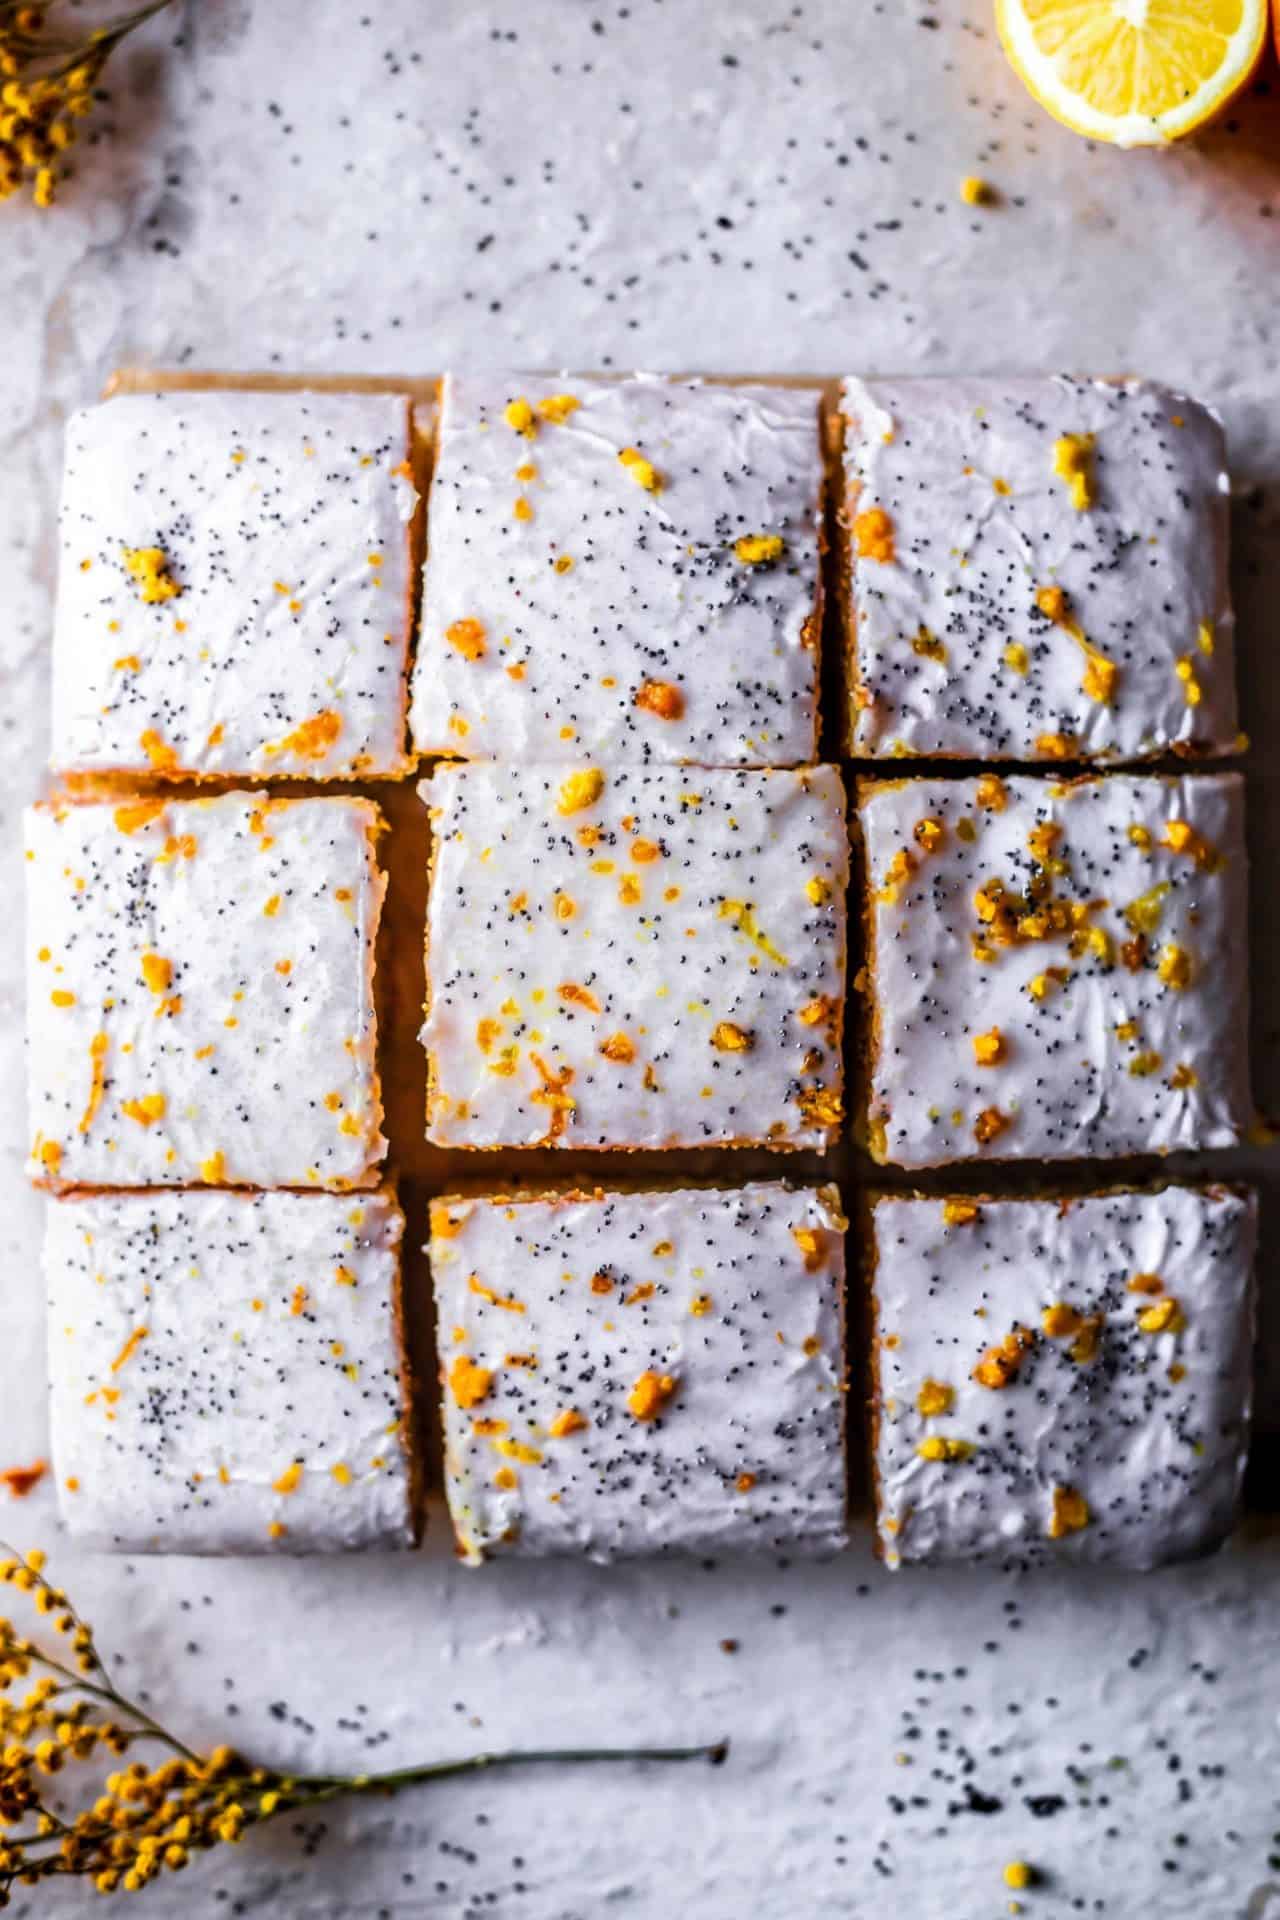 This Gluten-Free Citrus Poppy Seed Cake is light, spongy, flavourful, zesty, perfectly sweetened and just so delicious!
